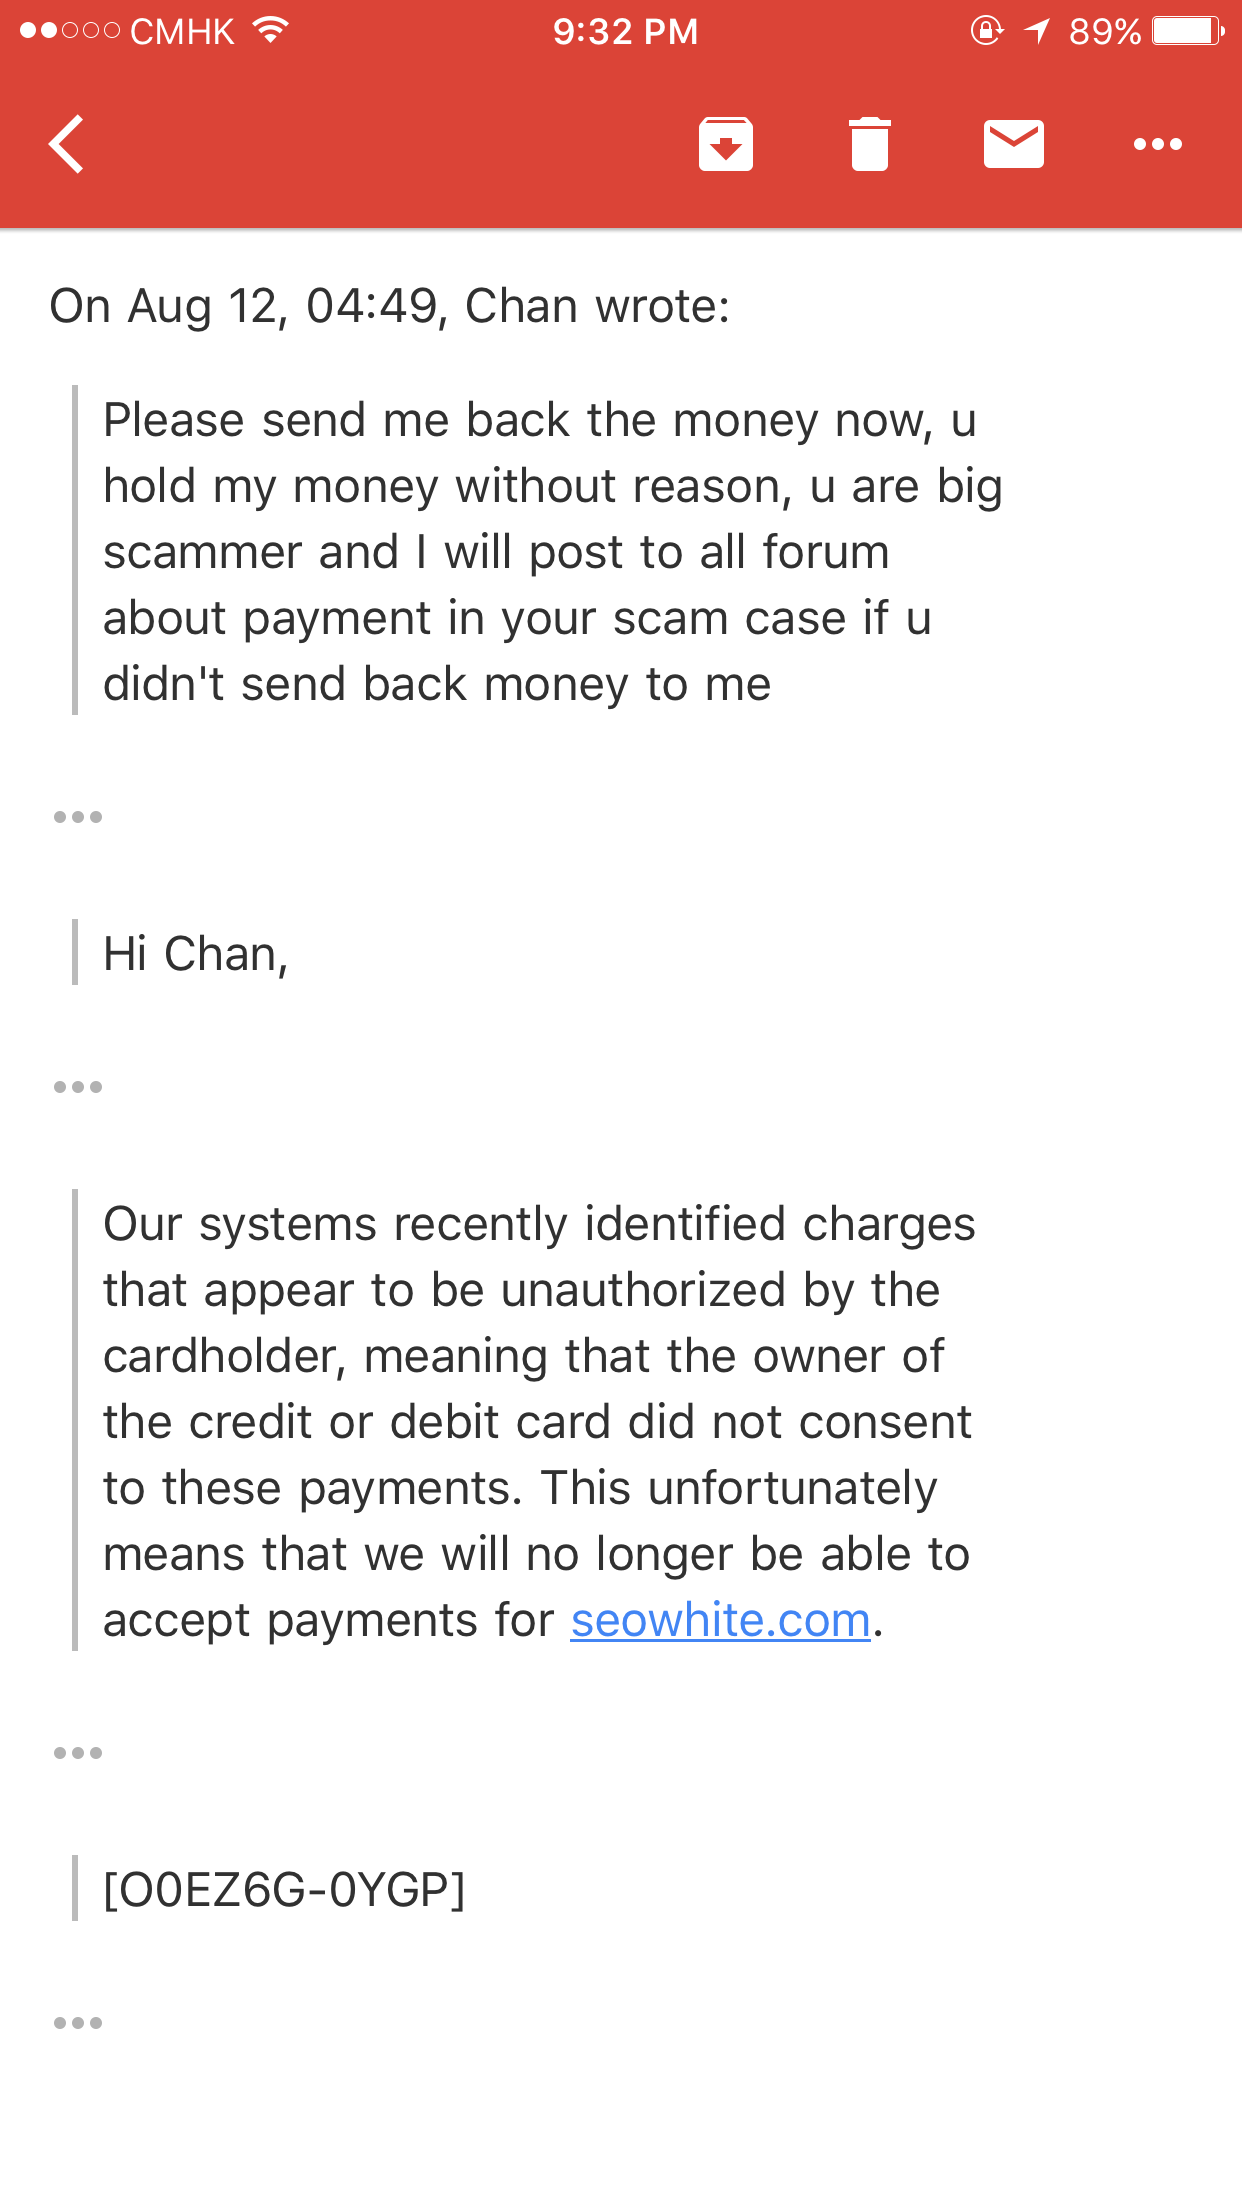 They reject to give me back money and no reply anymore